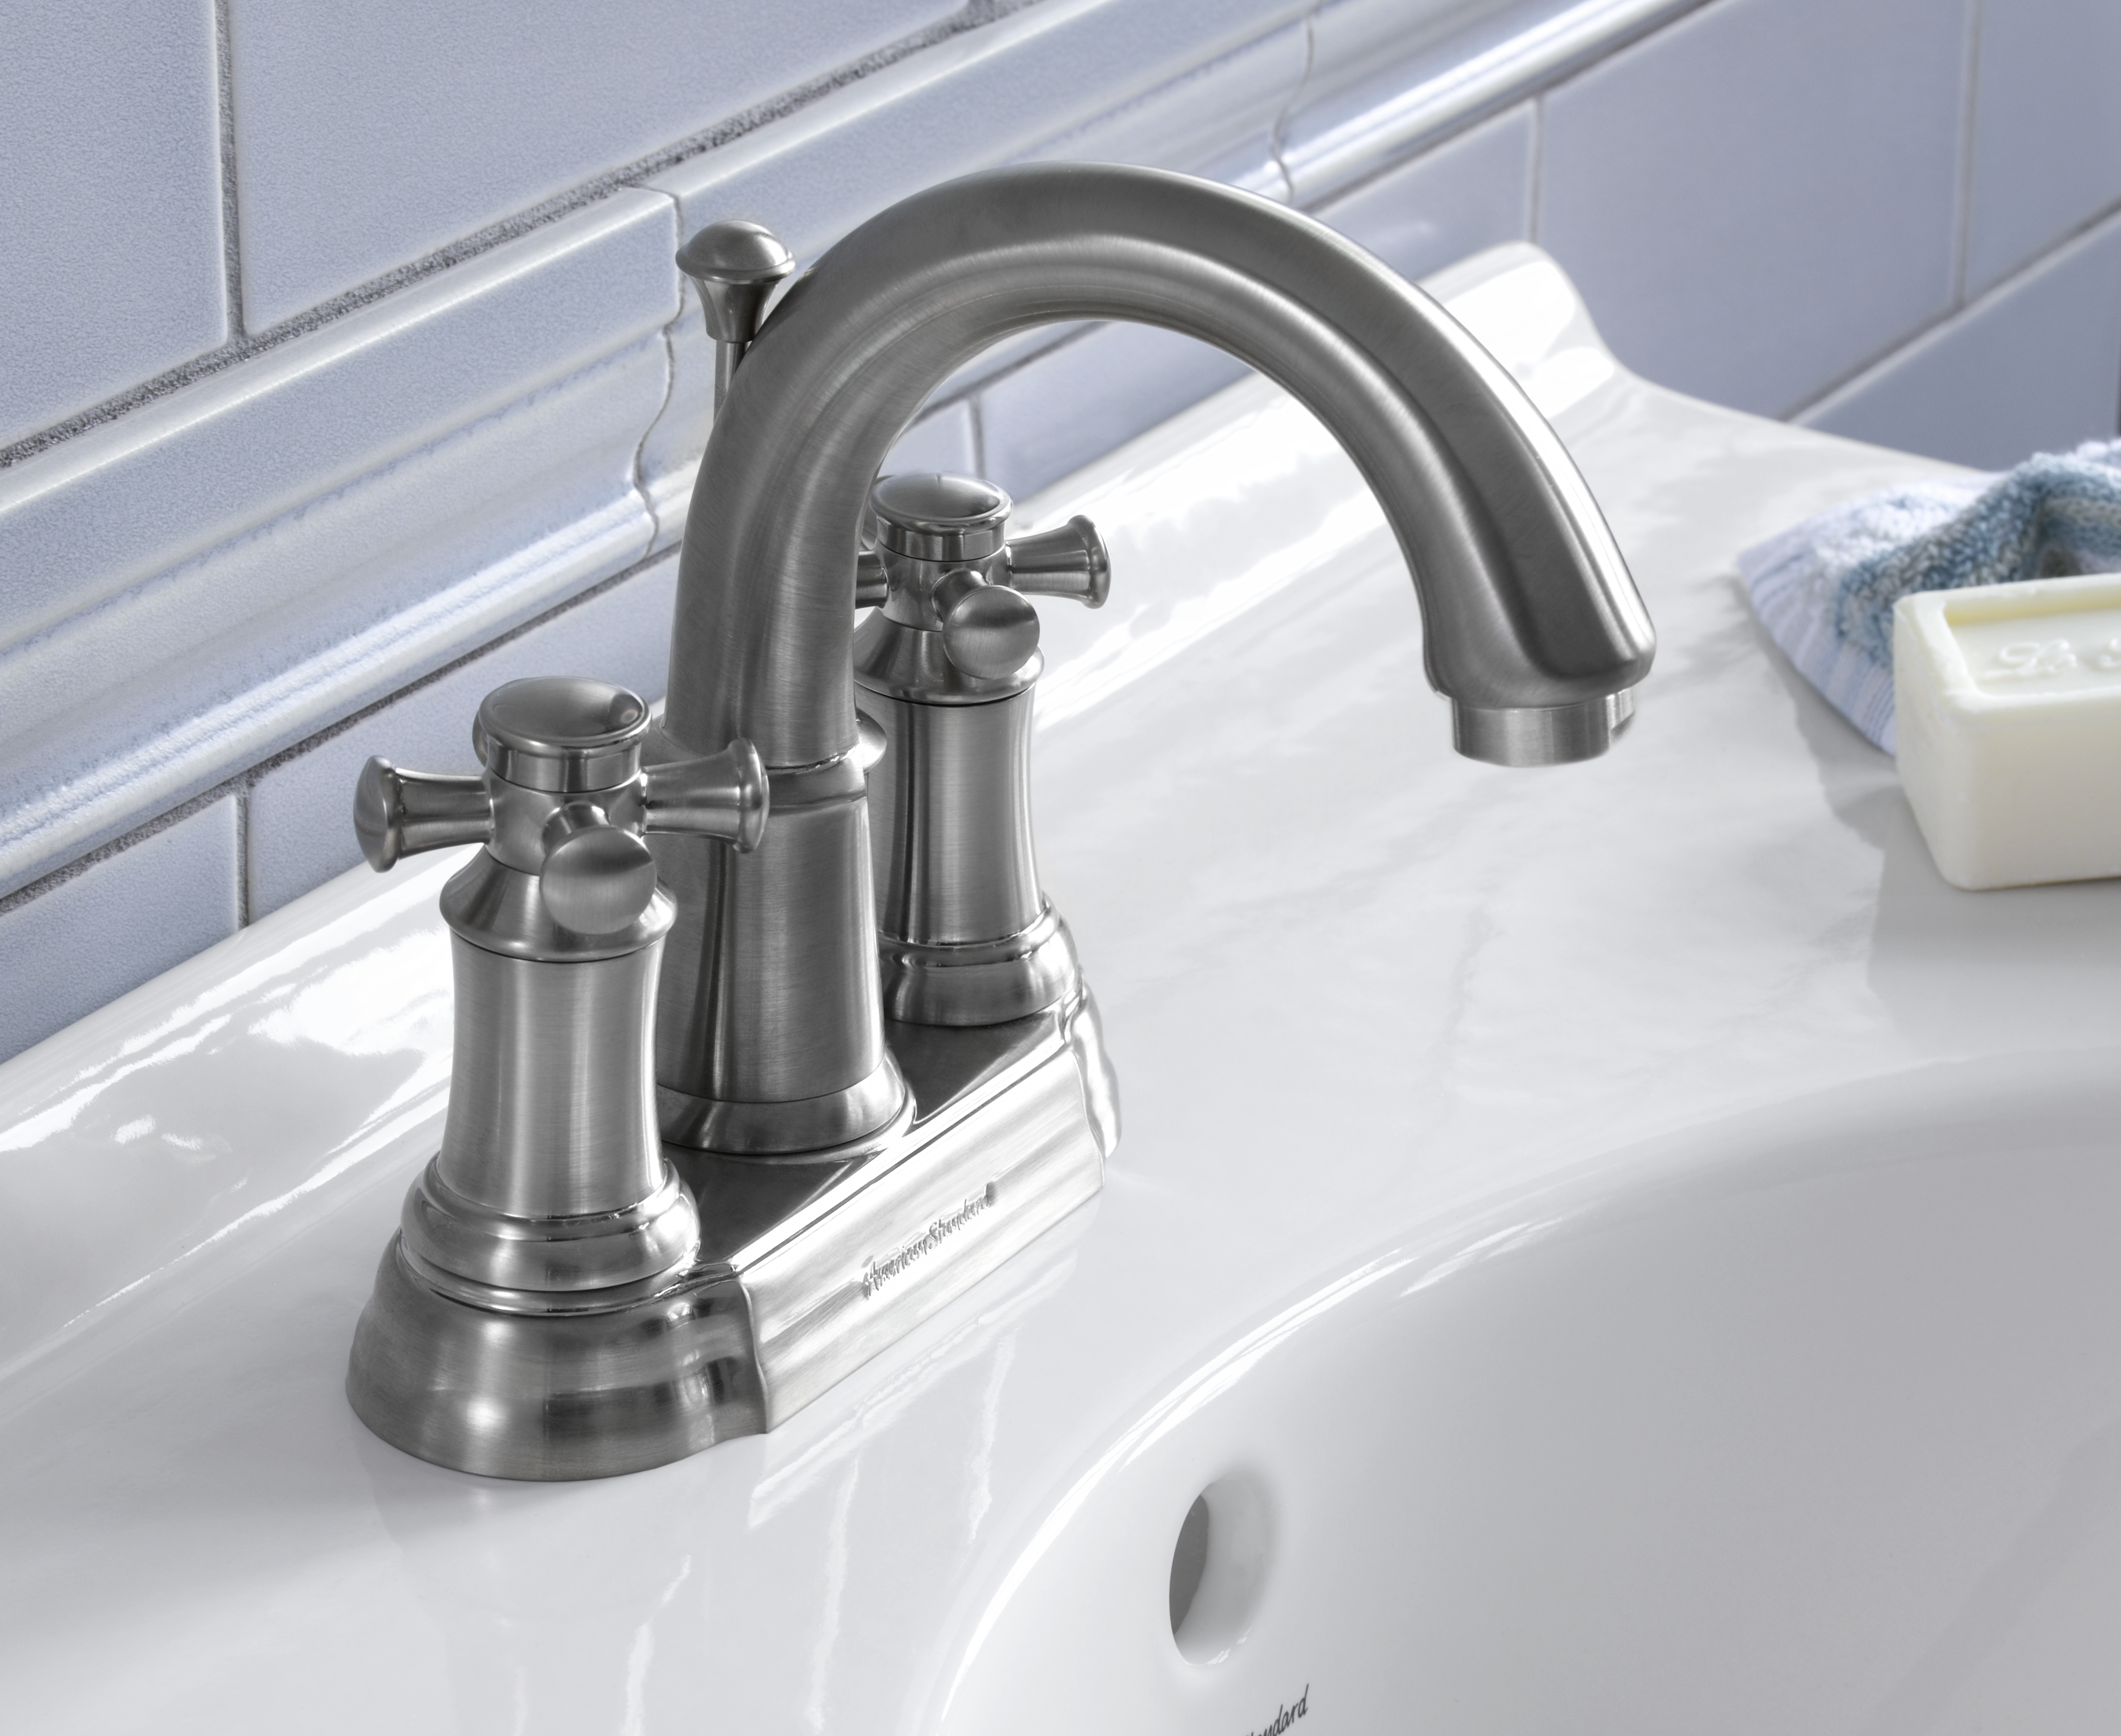 Portsmouth 4-In. Centerset 2-Handle Crescent Spout Bathroom Faucet 1.2 GPM with Cross Handles